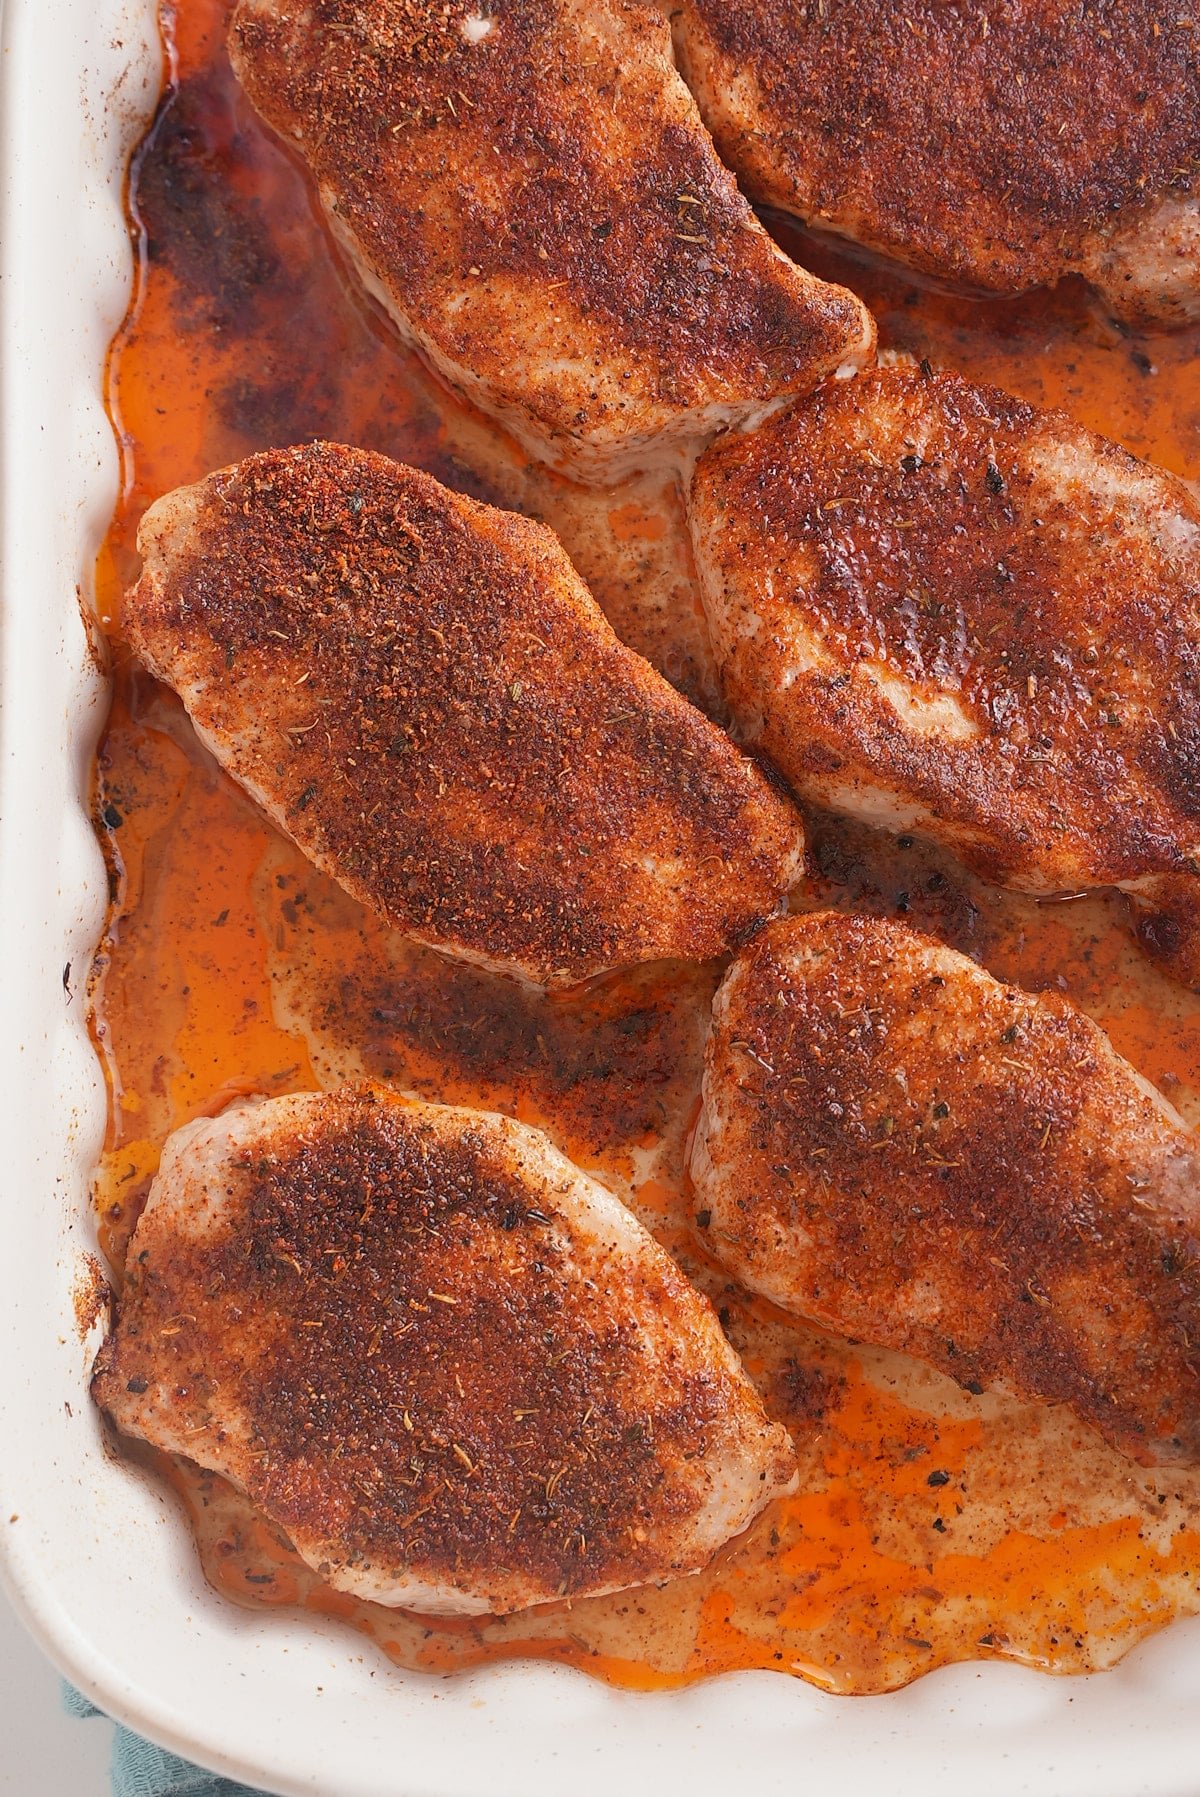 Oven baked pork chops in the baking dish.